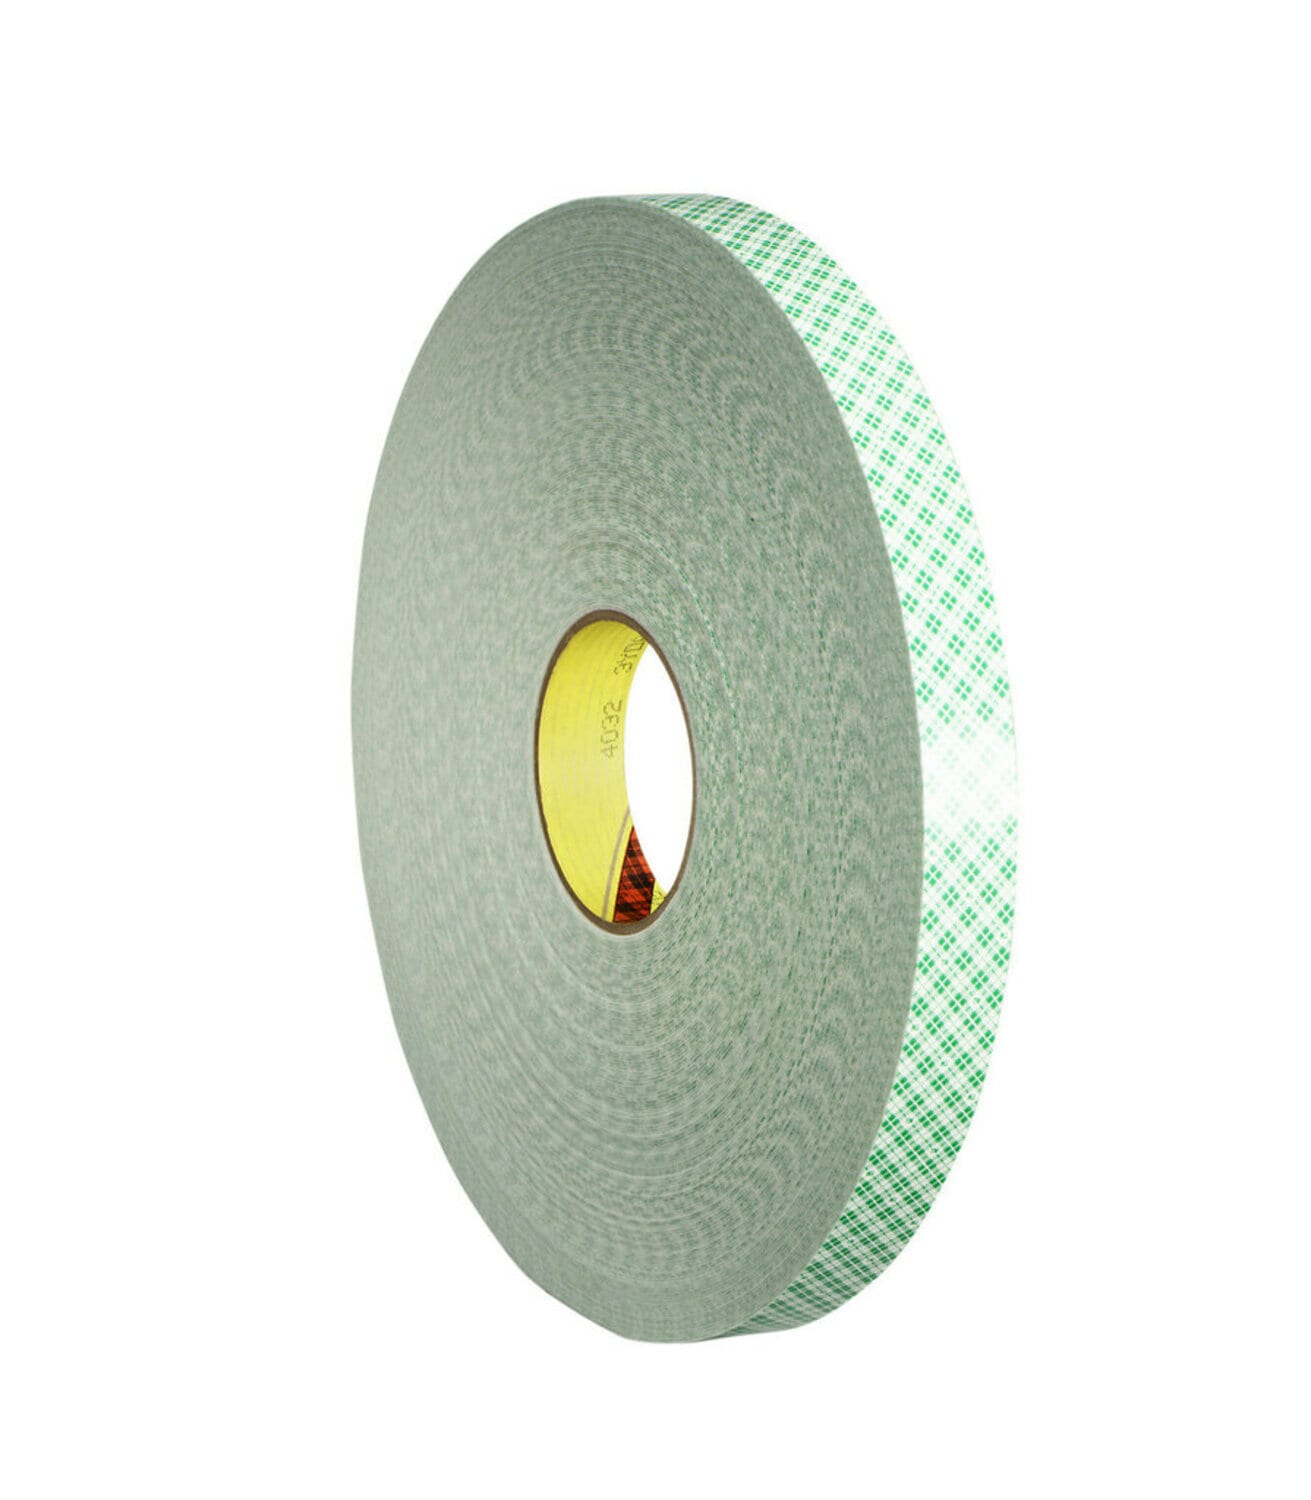 7100074616 - 3M Double Coated Urethane Foam Tape 4032, Off White, 24 in x 72 yd, 31
mil, 1 Roll/Case